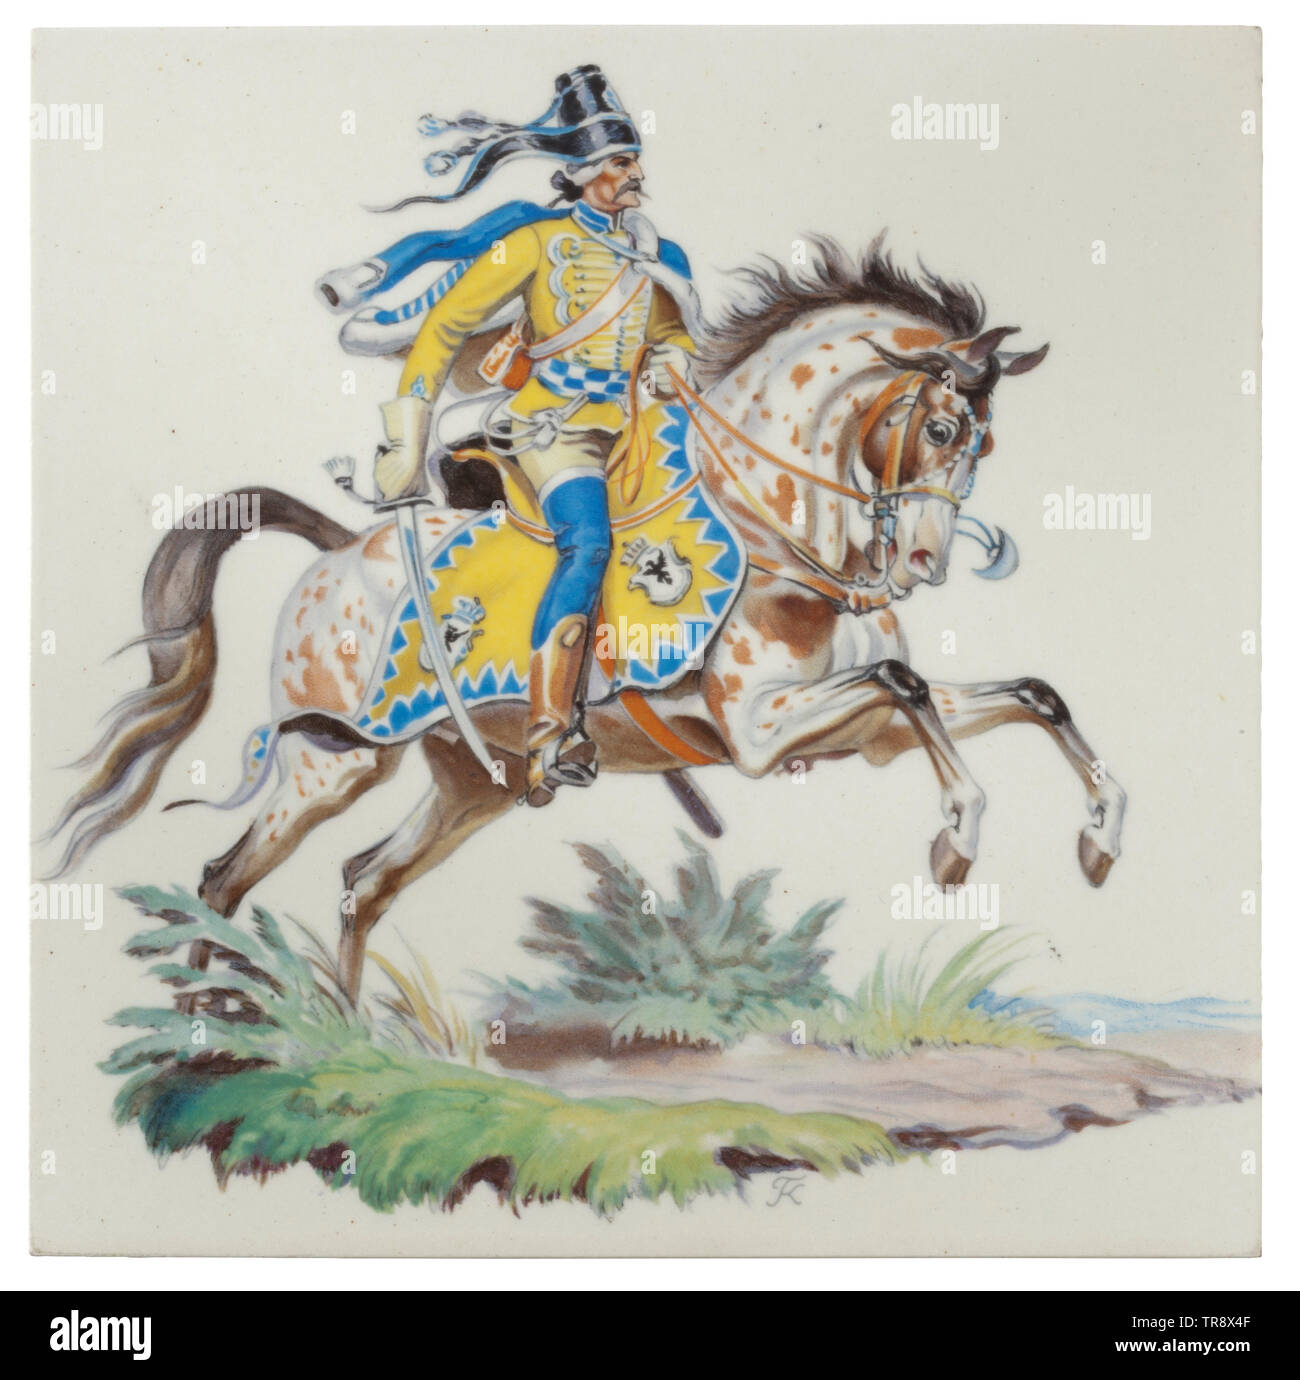 A Tile - Malachowski-Hussar A white porcelain tile with a colour picture of a Malachowski-Husar after the model '121' Allach porcelain figure, designed by Prof. Theodor Kärner, with his monogram 'TK'. 'Meissen / Made in Germany / 154.3' on the bottom. Dimensions circa 15 x 15 cm. Very rare. Cf. Porell, Allach Porcelain, vol. 2, p. 274 with an illustration of five tiles matching mounted figures. In 1942, five unique tiles were made at Hitler's commission as Christmas presents for SS-Obergruppenführer Bouhler. In 1944, Himmler ordered a small series of 50 pieces, which were e, Editorial-Use-Only Stock Photo